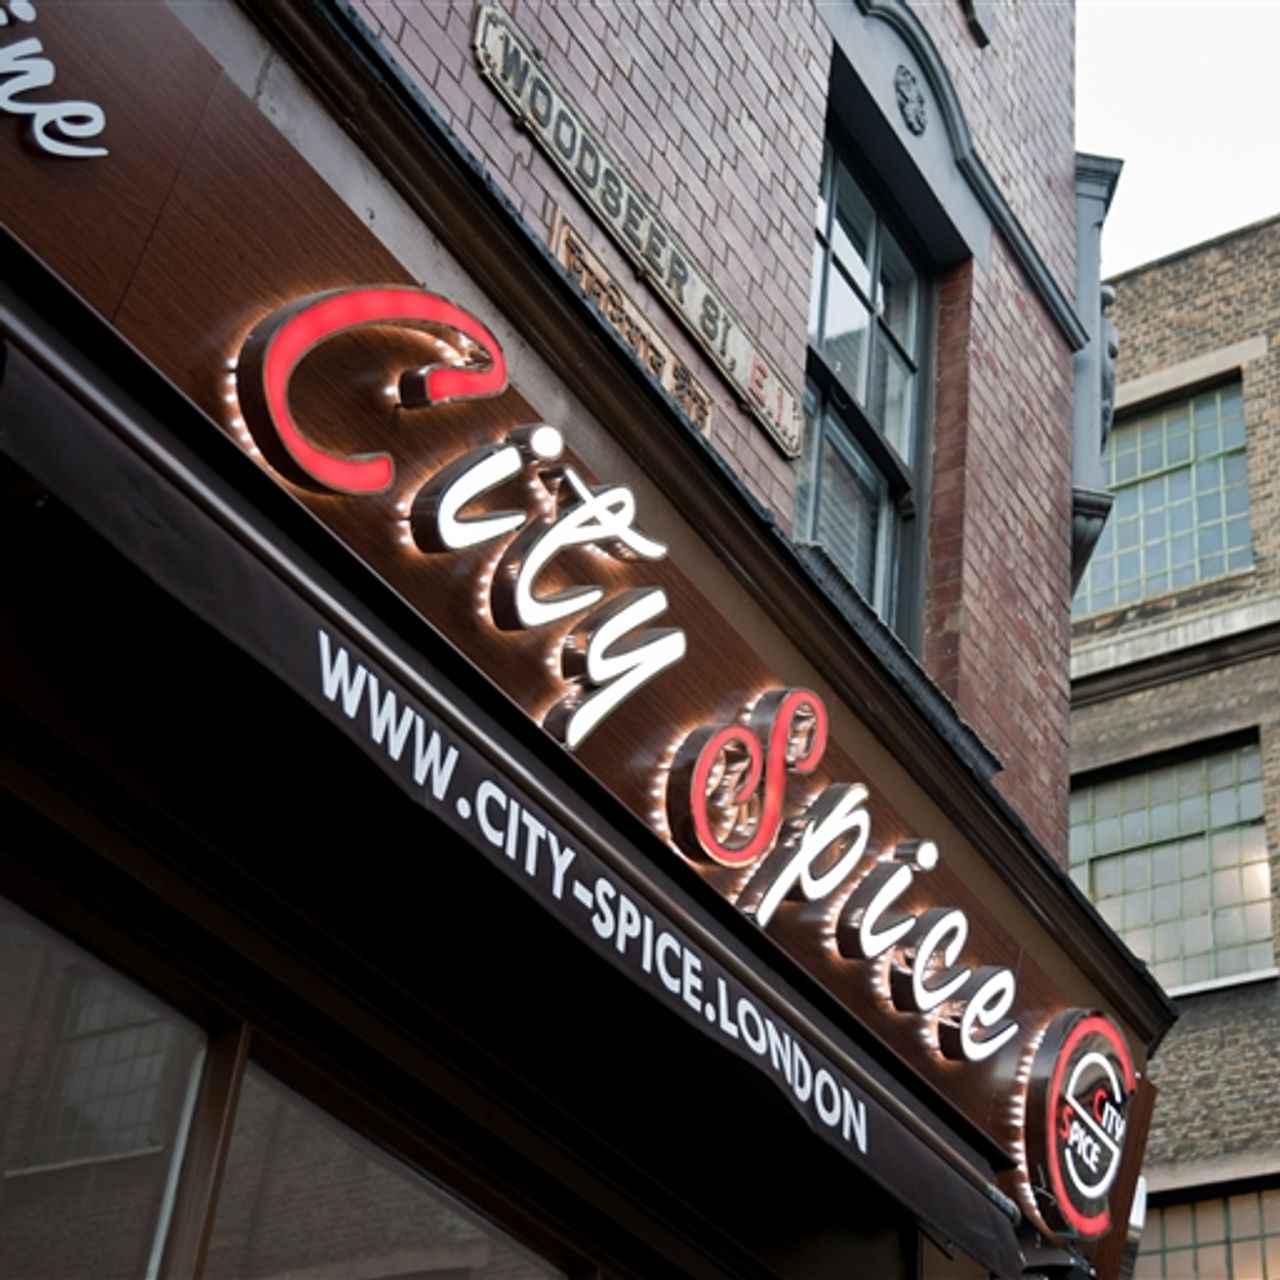 City Spice Curry House is a popular restaurant